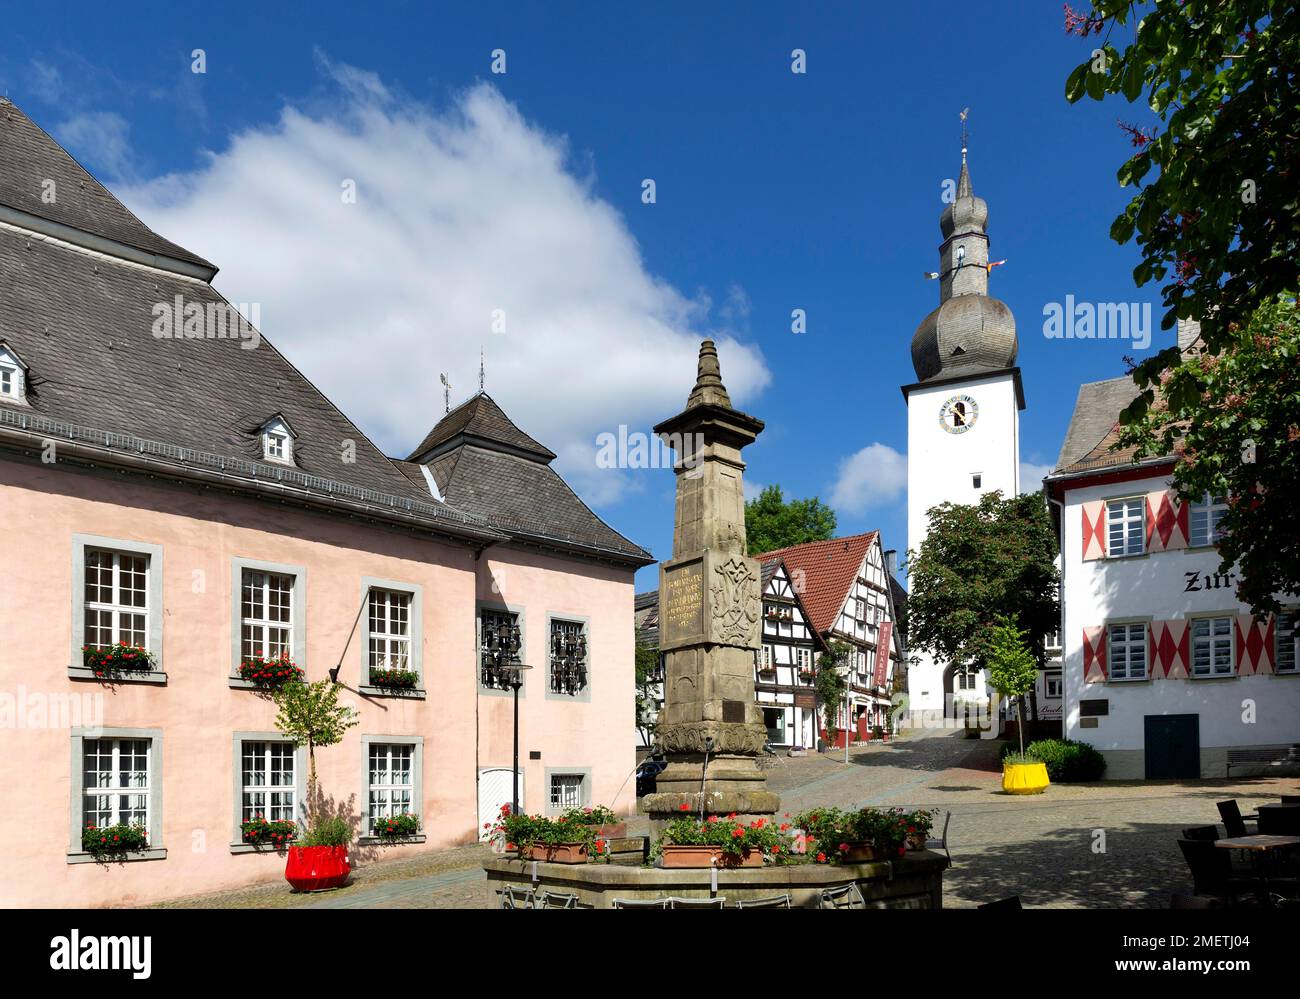 Old Town Hall, Restaurant Zur Krim, Bell Tower and Maximilian Fountain, Old Market, Old Town, Arnsberg, Sauerland, North Rhine-Westphalia, Germany Stock Photo